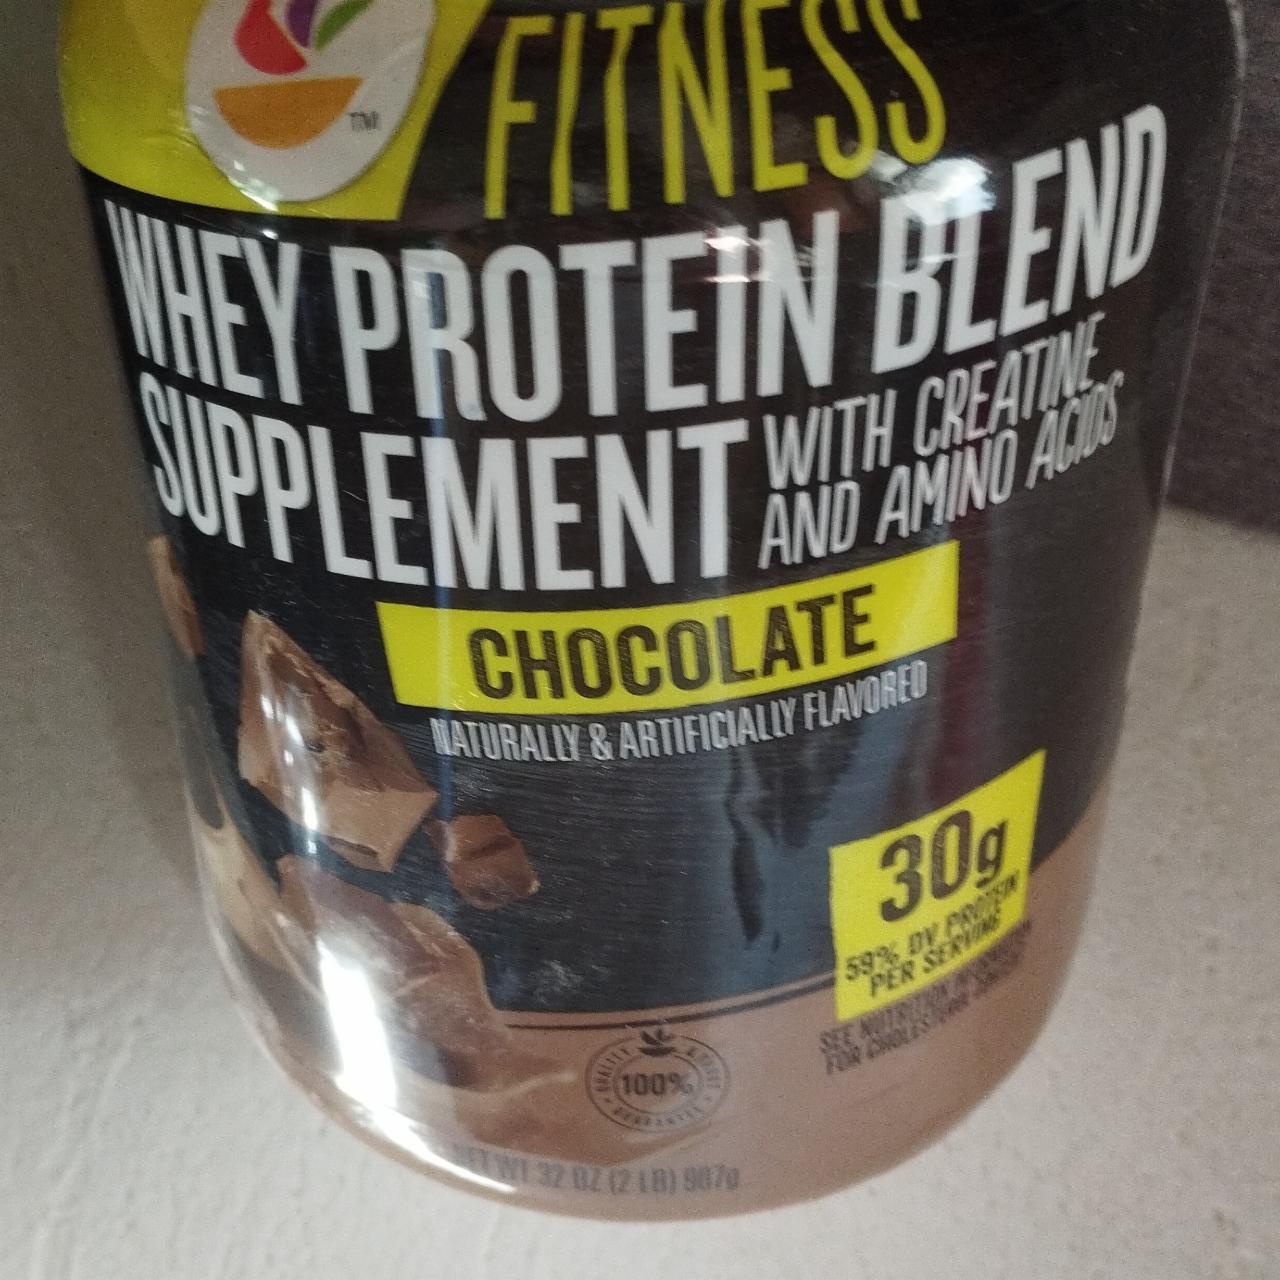 Fotografie - Whey Protein Blend Supplement Chocolate Fitness